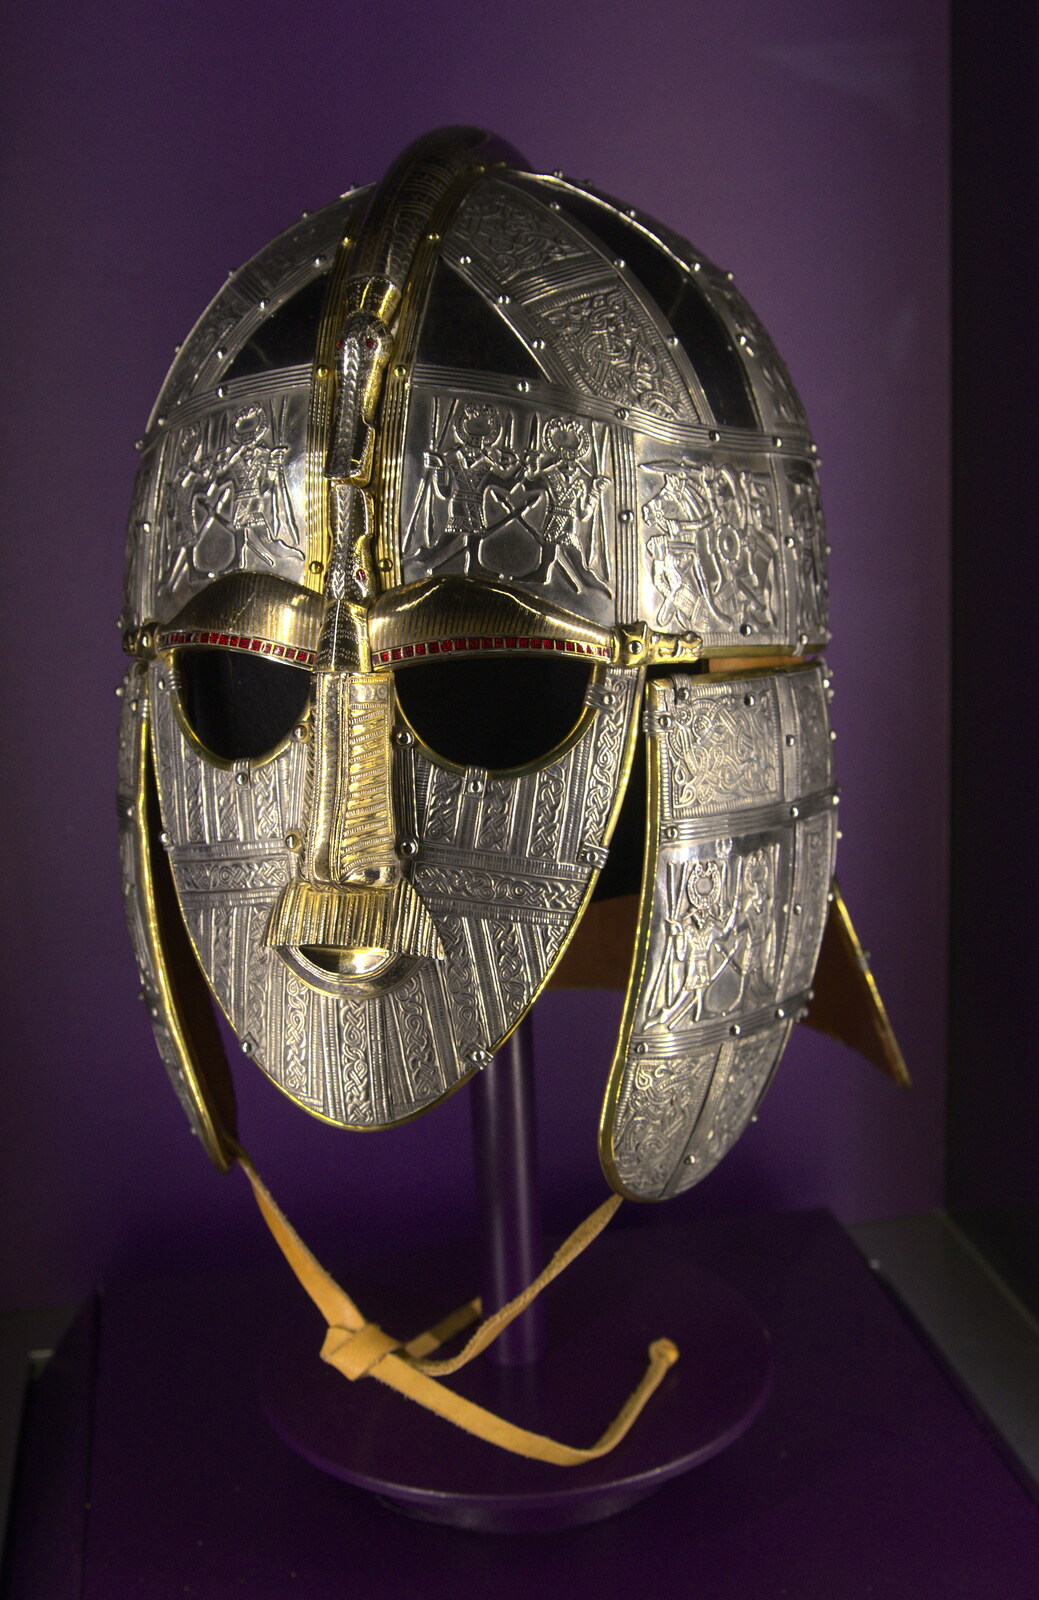 Another helmet reproduction from A Trip to Sutton Hoo, Woodbridge, Suffolk - 29th January 2017